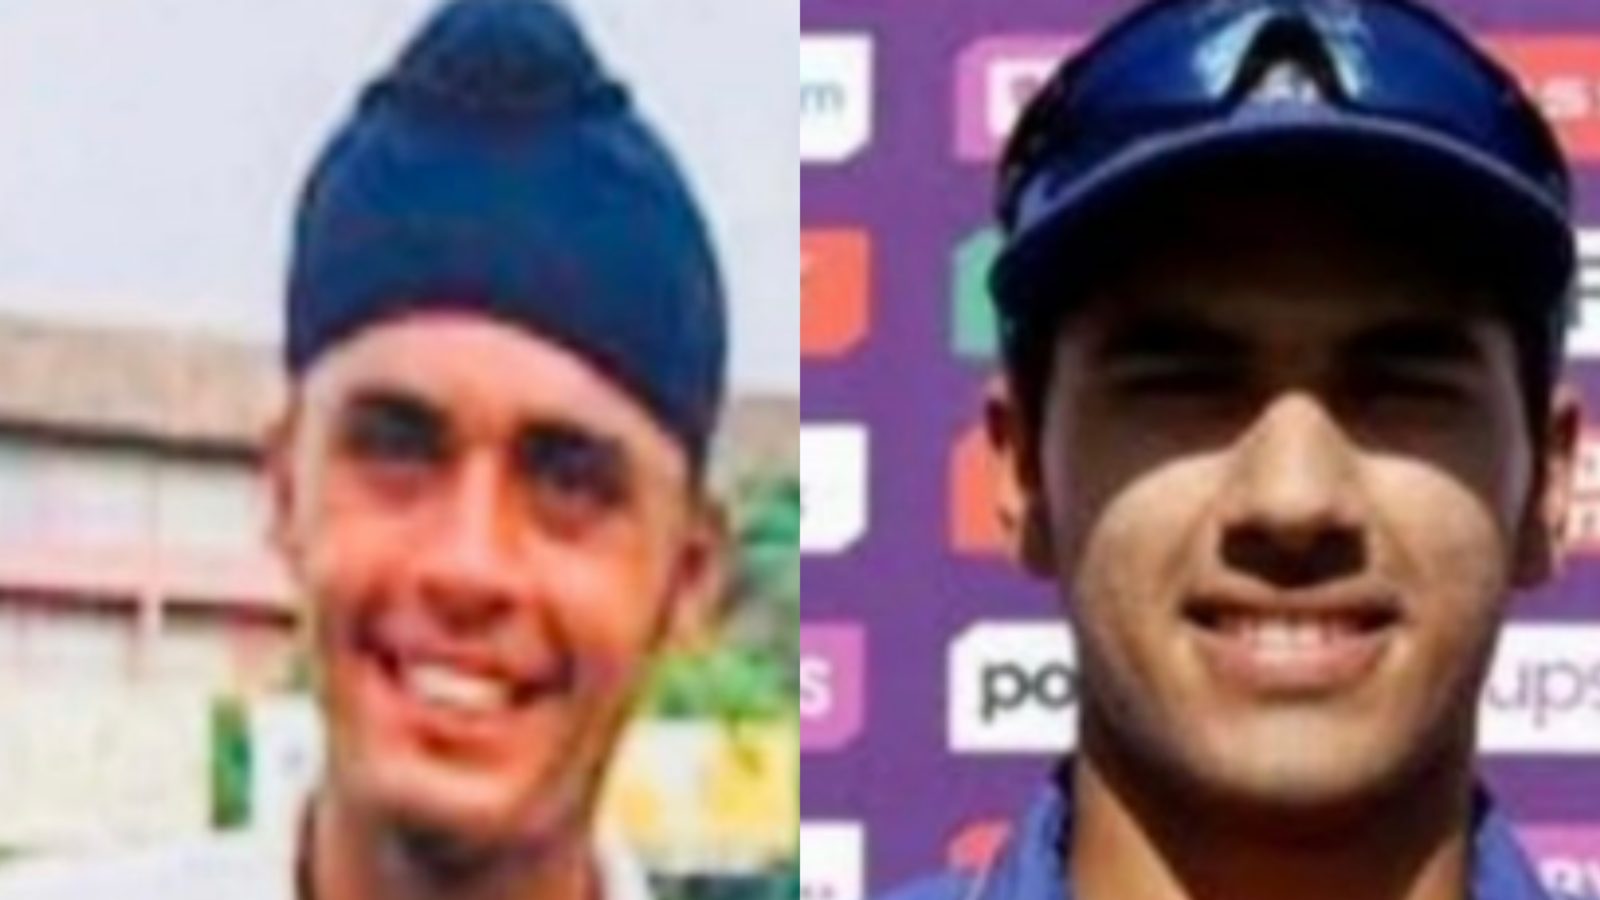 Raj Bawa was named Man of the Match in the Under-19 World Cup final, and his brother won the award 22 years ago.